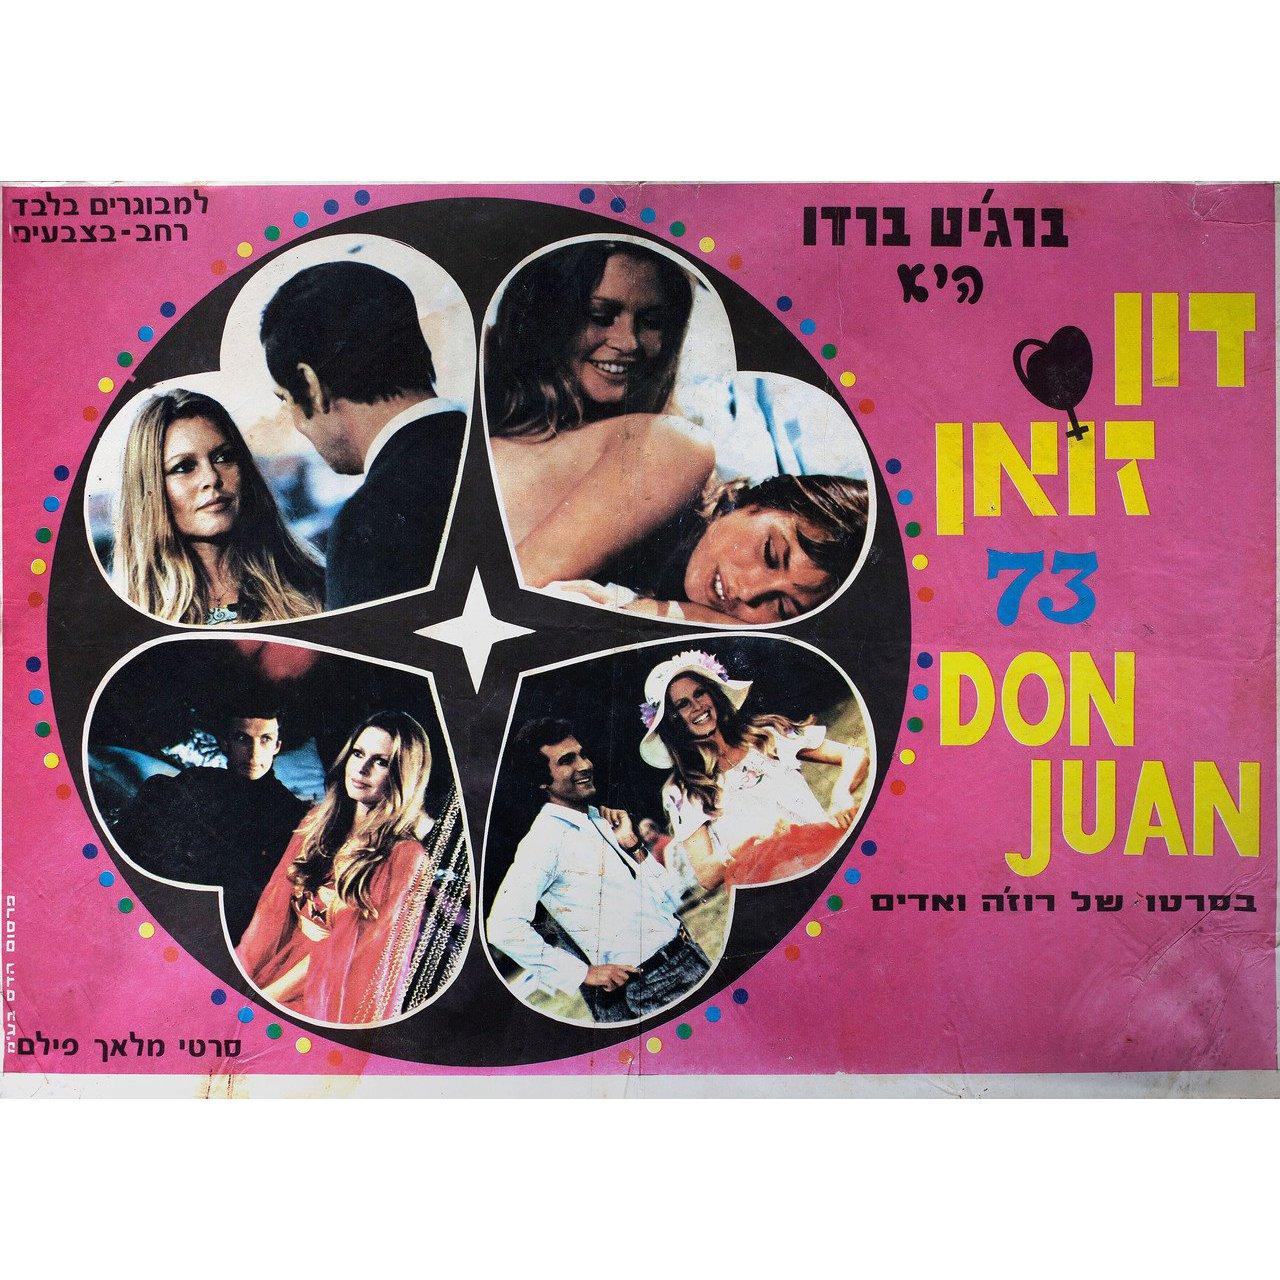 Original 1973 Israeli B2 poster for the film Ms. Don Juan (Don Juan ou Si Don Juan etait une femme...) directed by Roger Vadim with Brigitte Bardot / Robert Hossein / Mathieu Carriere / Michele Sand. Very good fine condition, rolled. Please note: